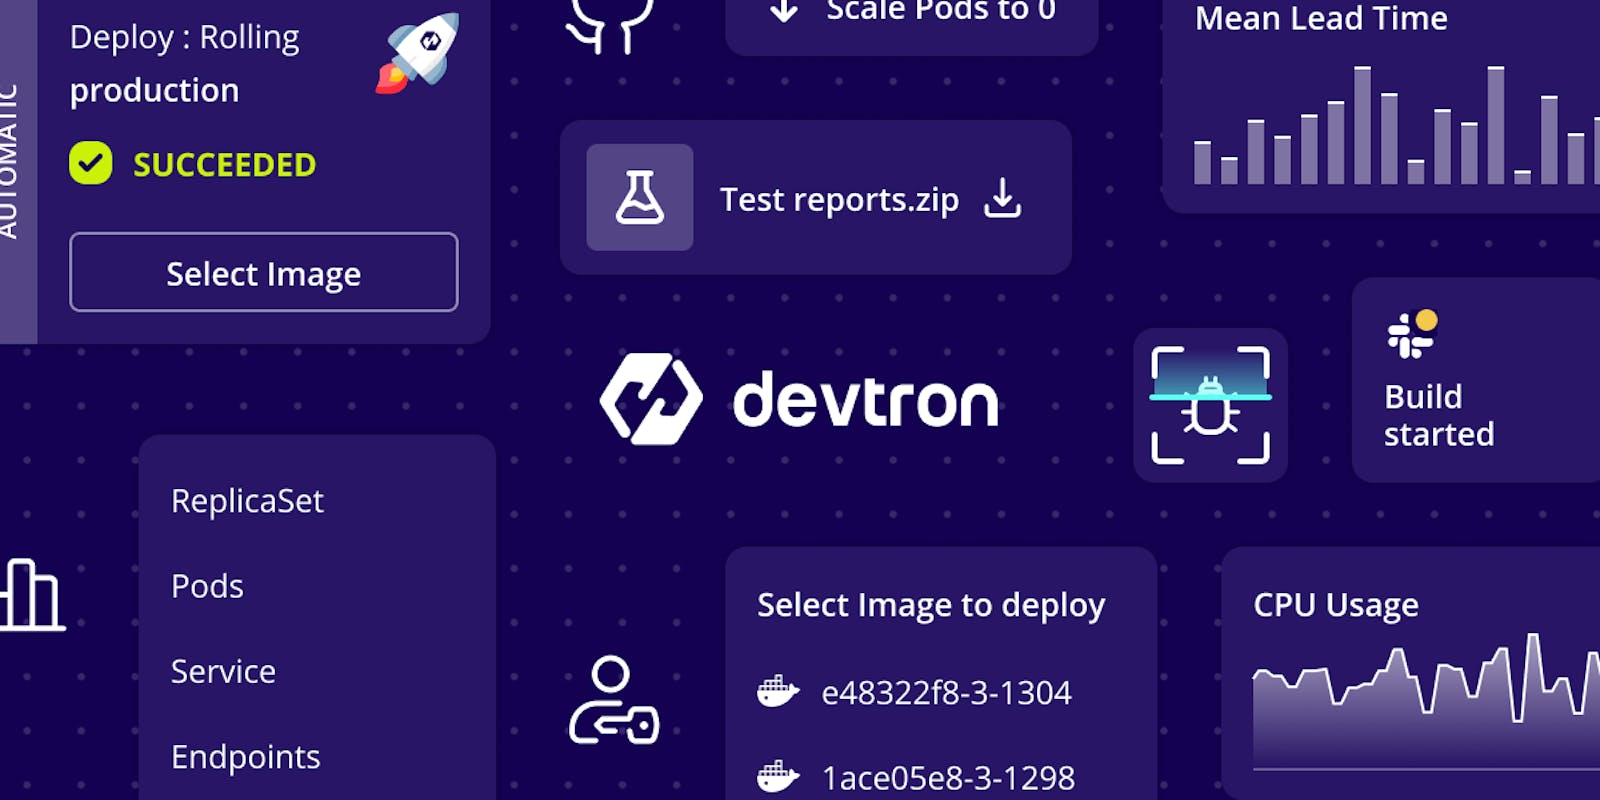 Getting started with Devtron